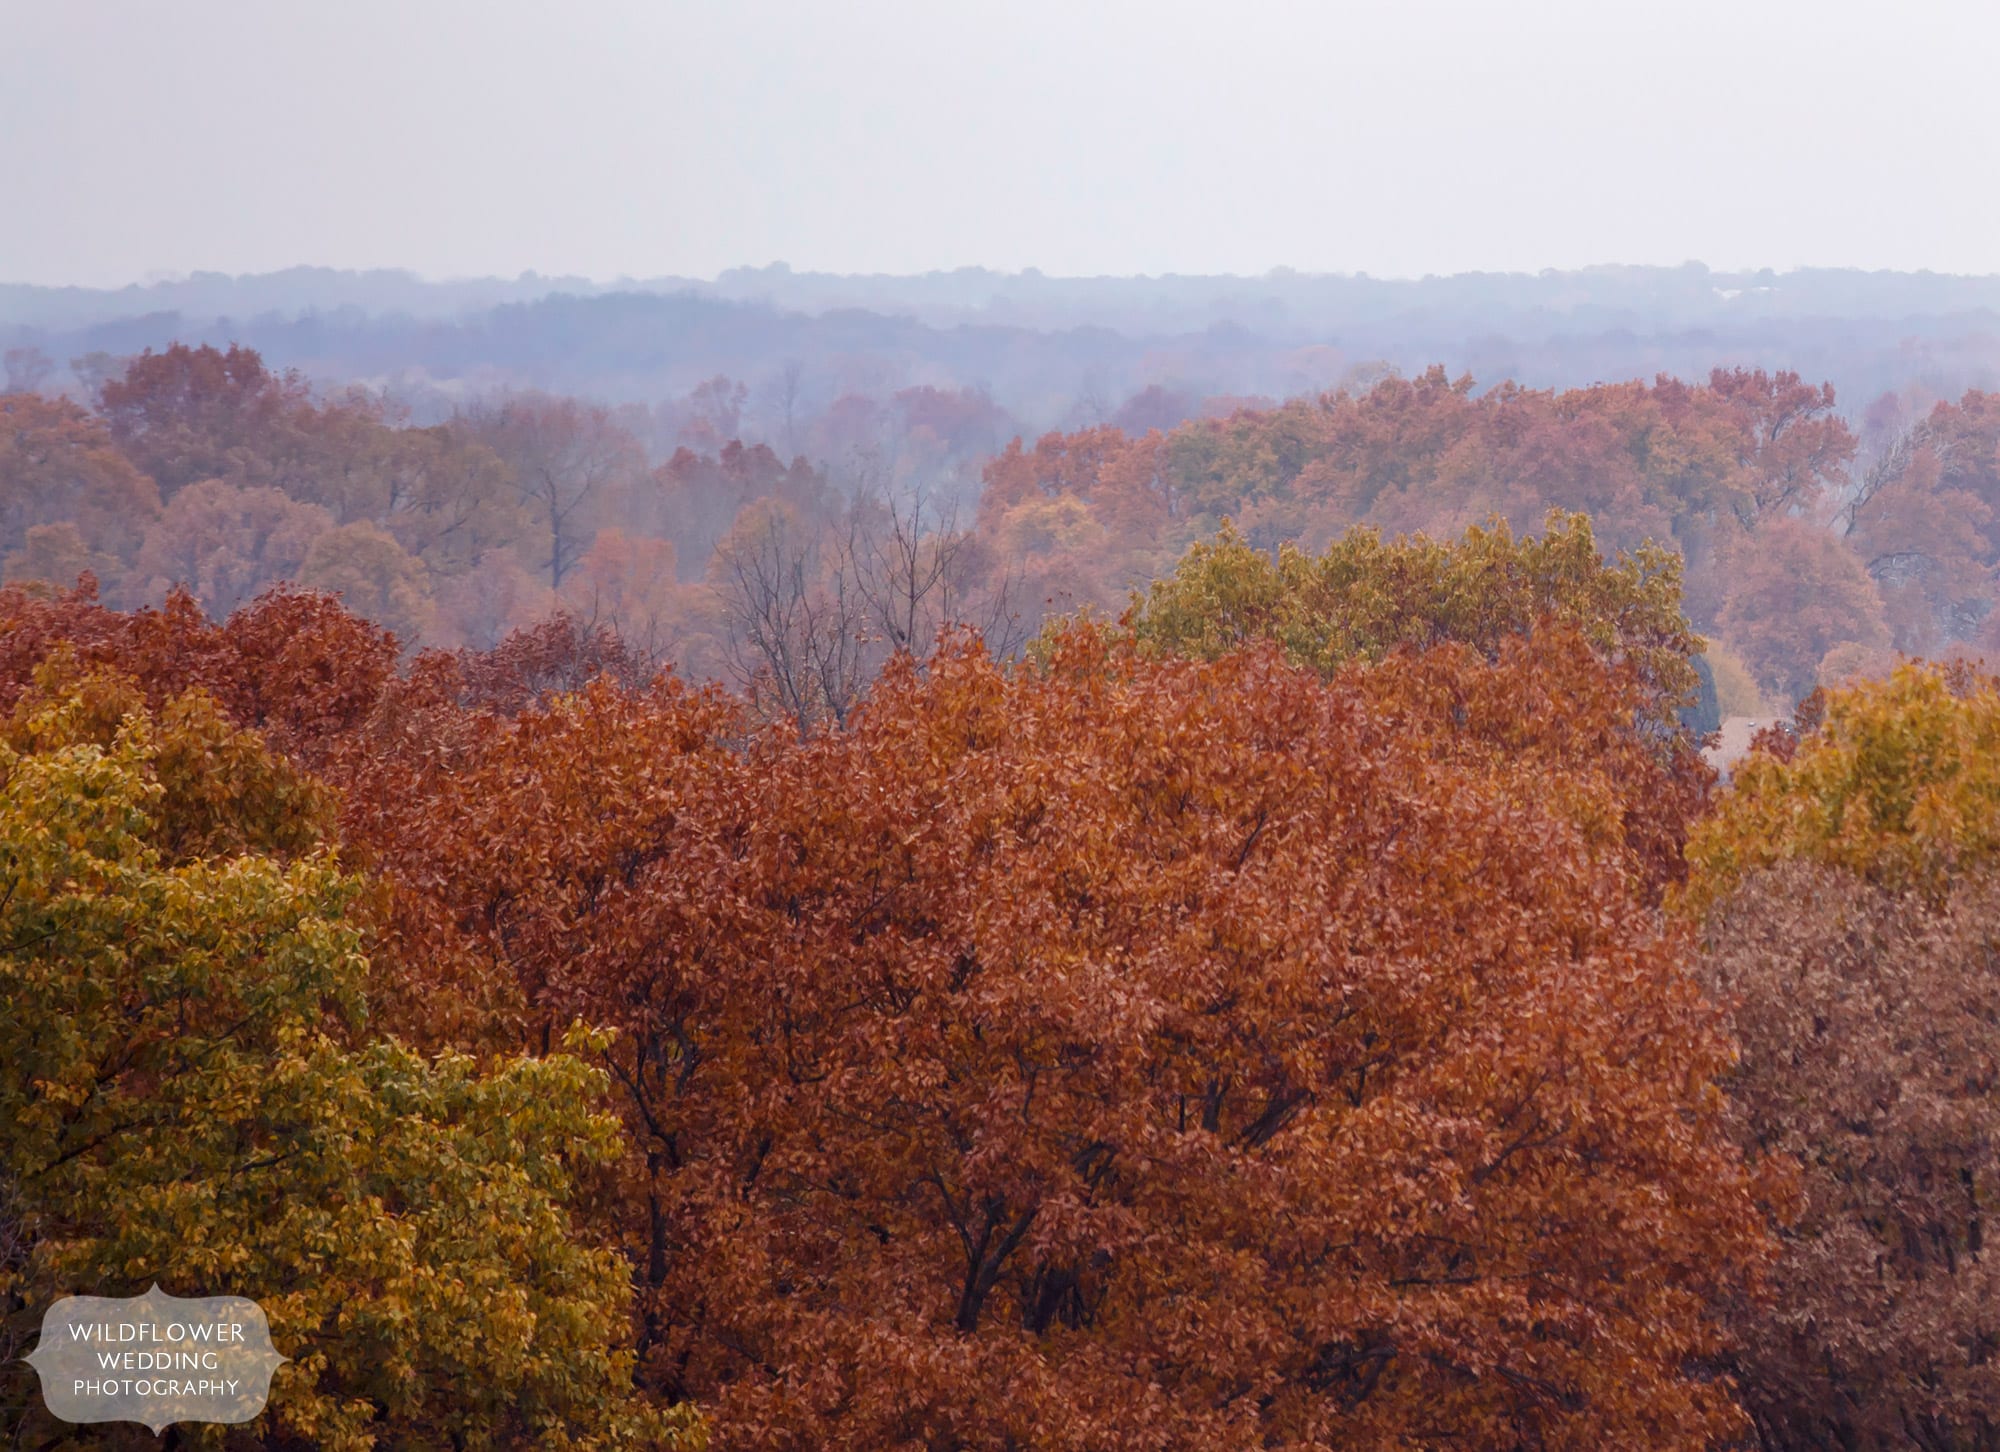 The Missouri River below is surrounded by red and blue fall colors in November in Rocheport, MO.